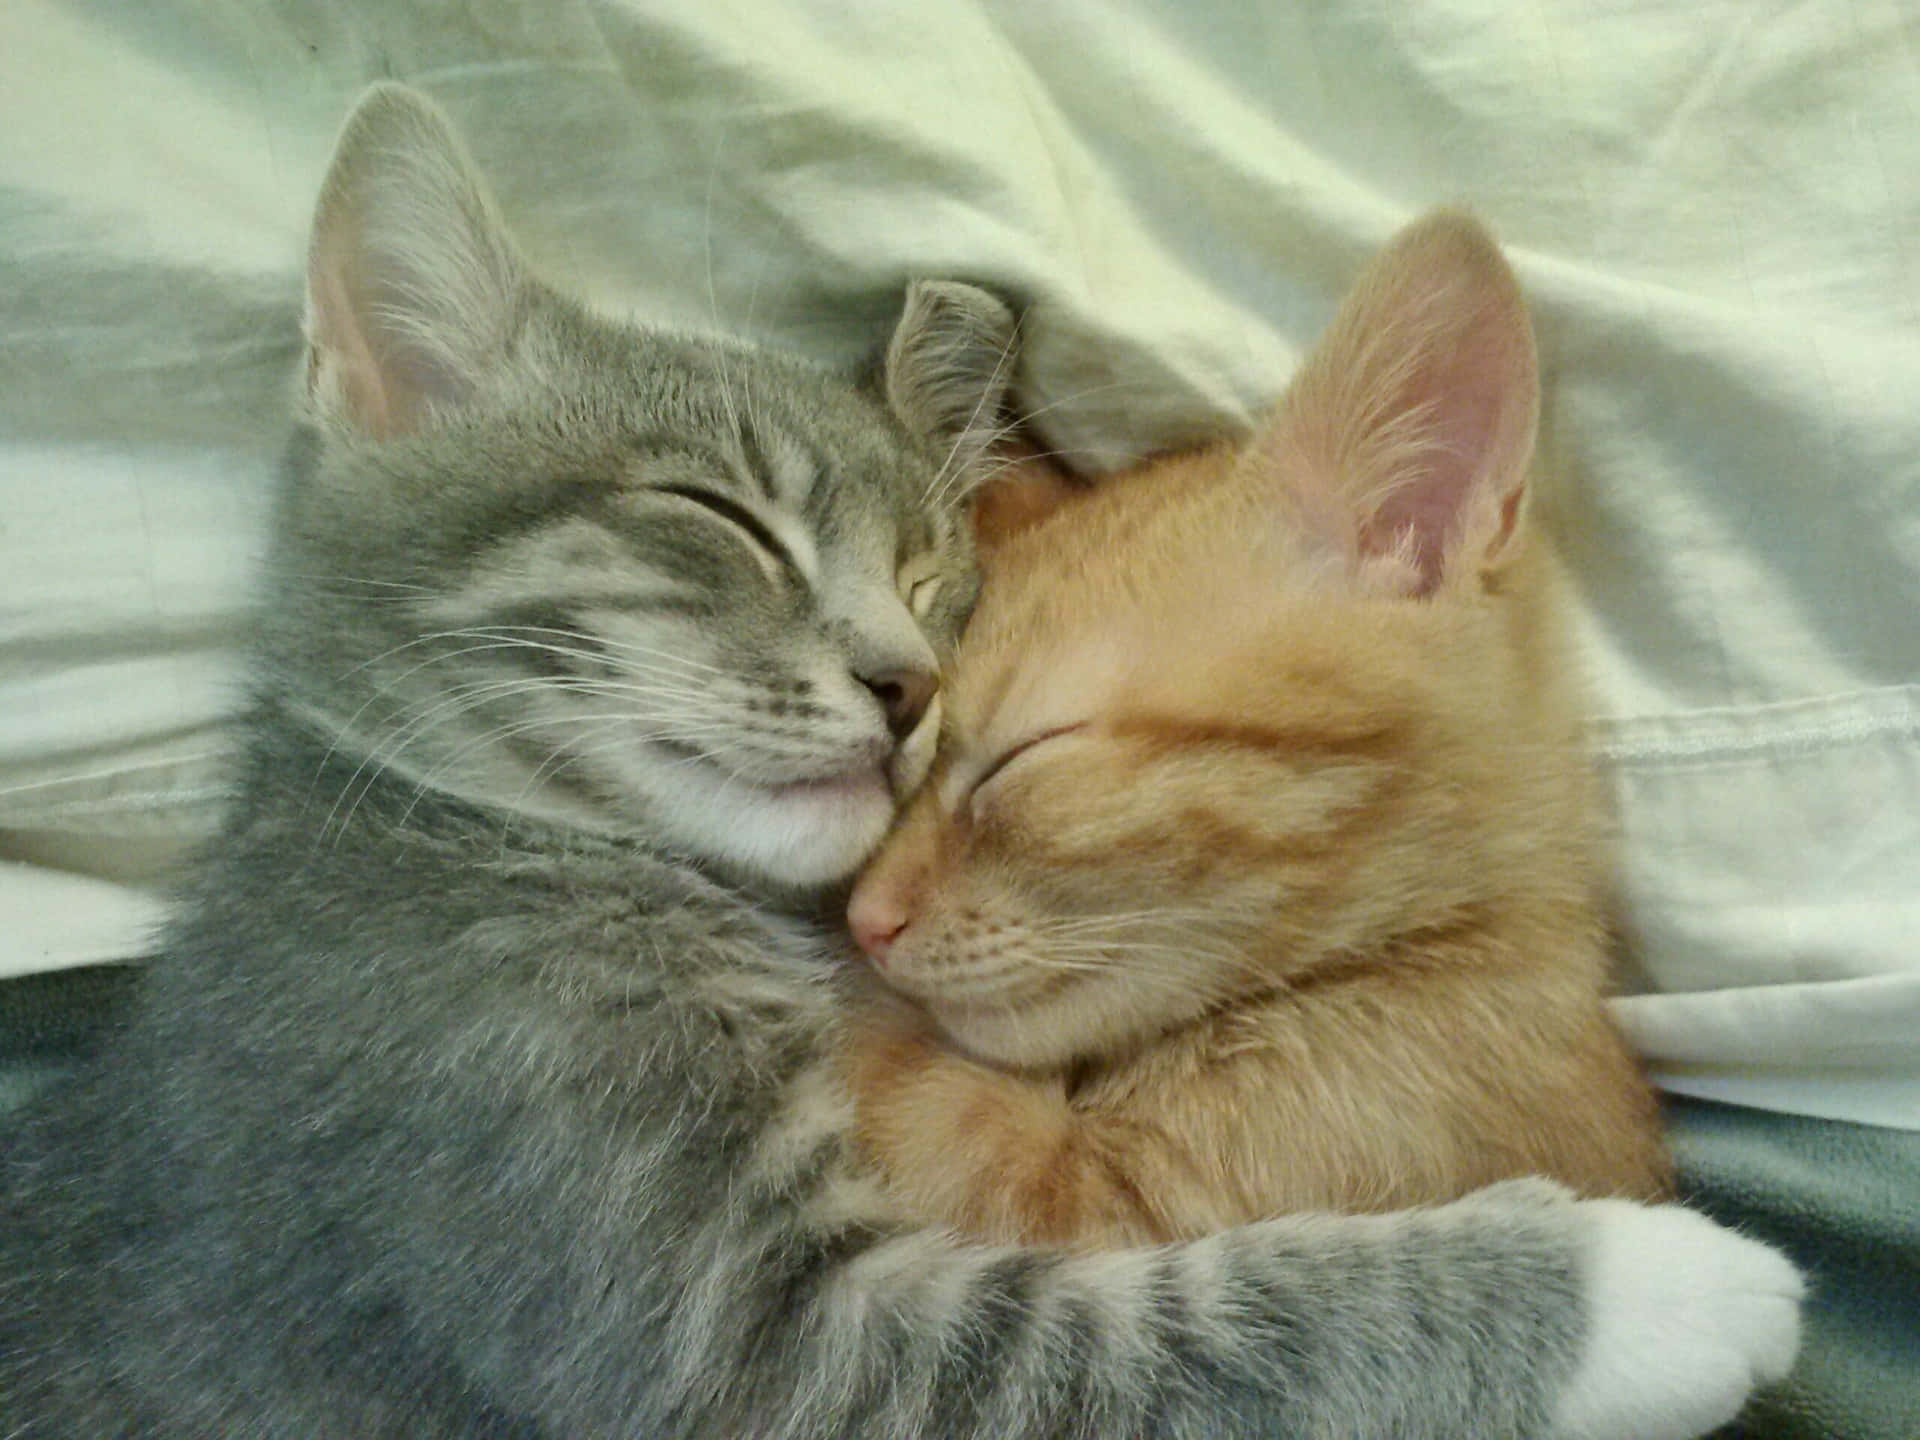 Two Kittens Cuddling On A Bed